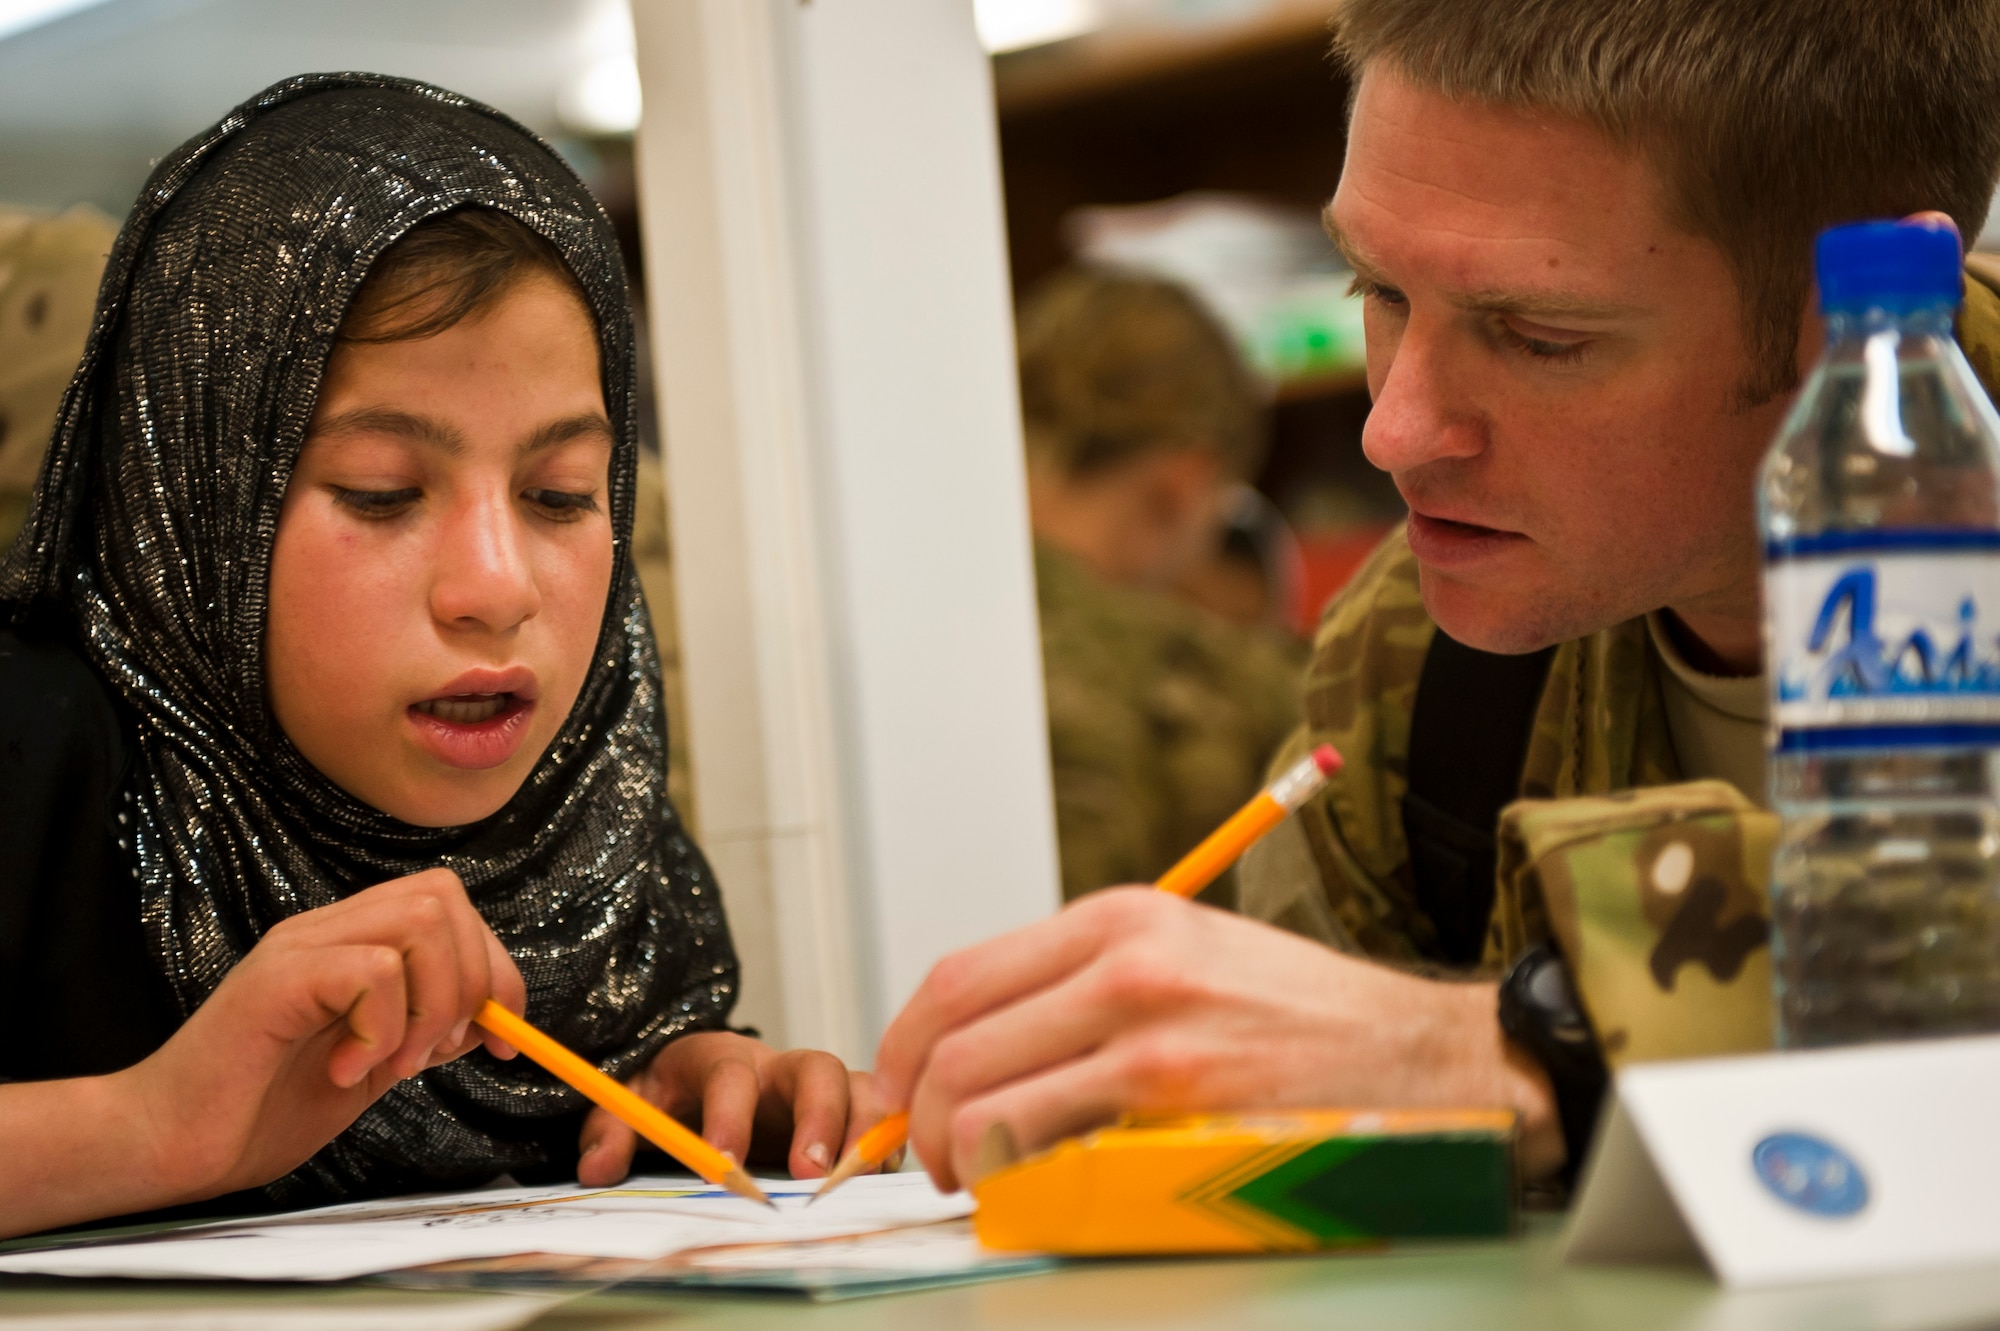 Muzghan, a local Afghan student, and Capt. Leonard Spigiel, a volunteer from the 774th Expeditionary Airlift Squadron, work on a project together during a “Cat in the Hat” education session at Bagram Airfield, Afghanistan, Oct. 14, 2012. The educational outreach program supports the International Security Assistance Force’s counter-insurgency efforts by enabling positive interaction between U.S. service members and the local community. (U.S. Air Force photo/Capt. Raymond Geoffroy)